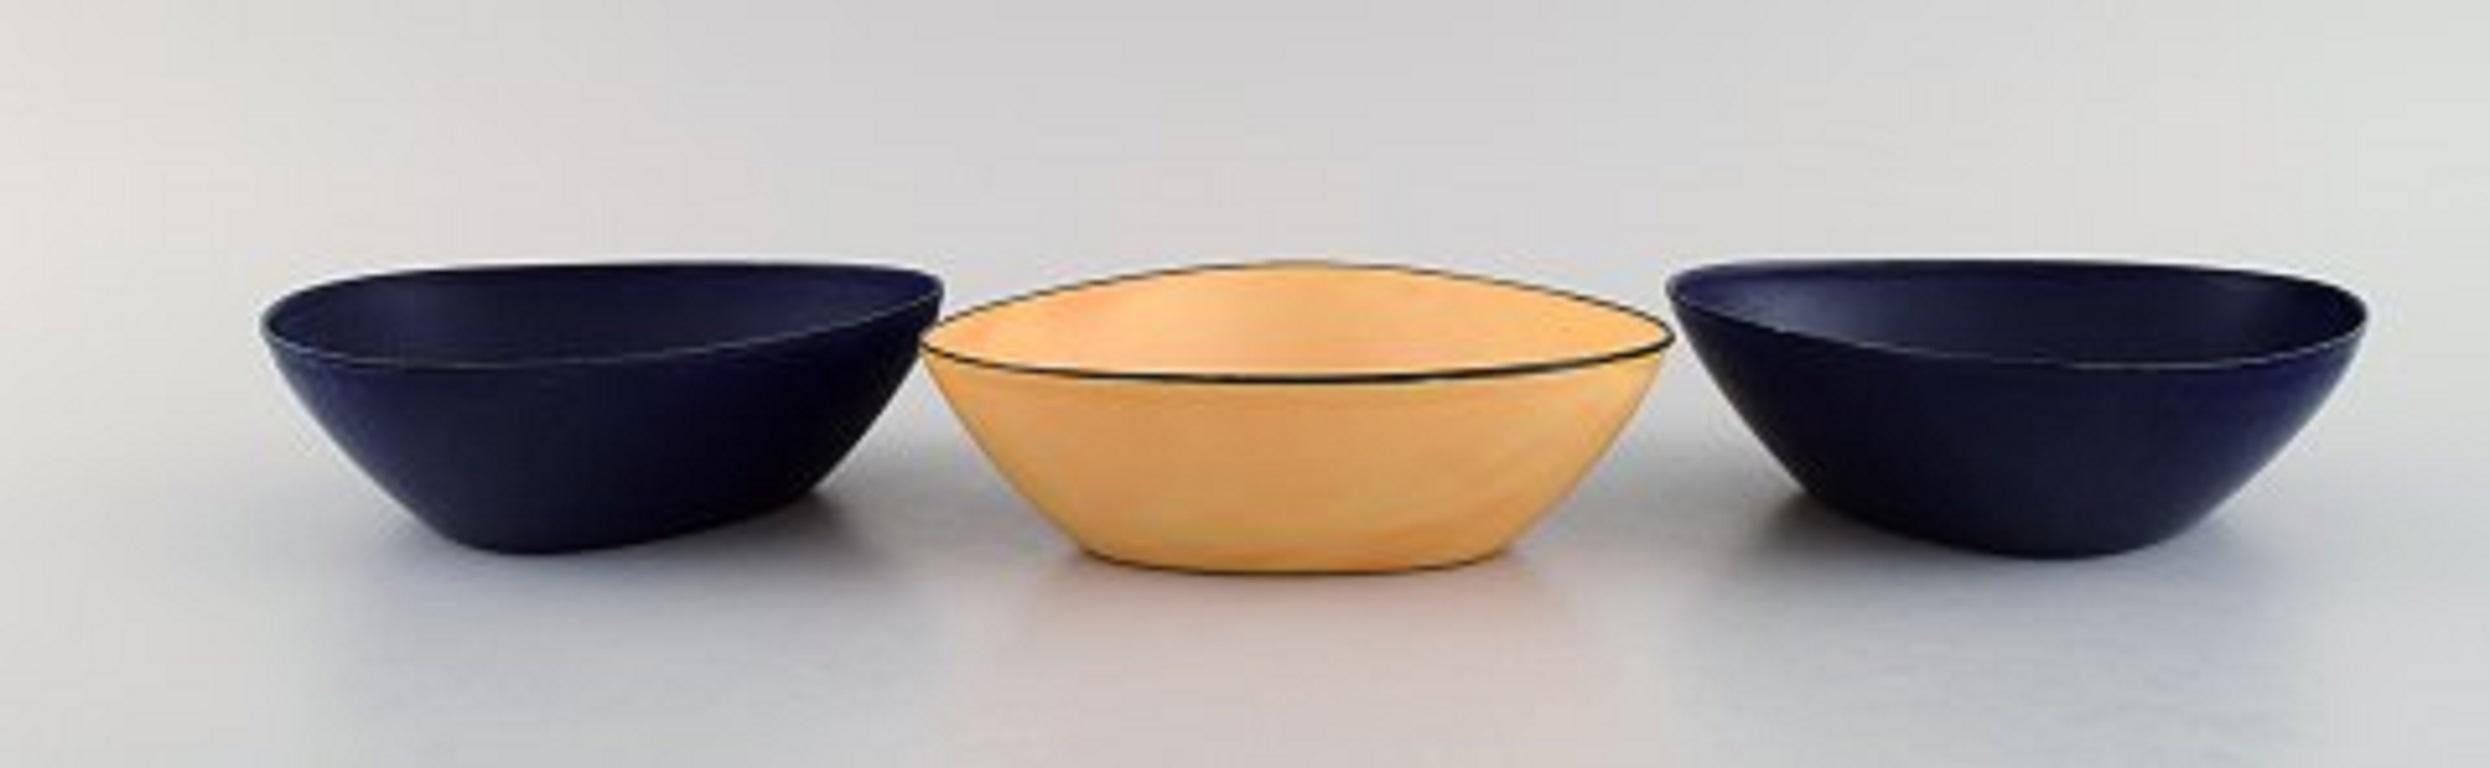 Kockum, Sweden. Three bowls in dark blue and yellow enamel, 1970s.
Measures: 15 x 4.8 cm.
In excellent condition with signs of use.
Stamped.